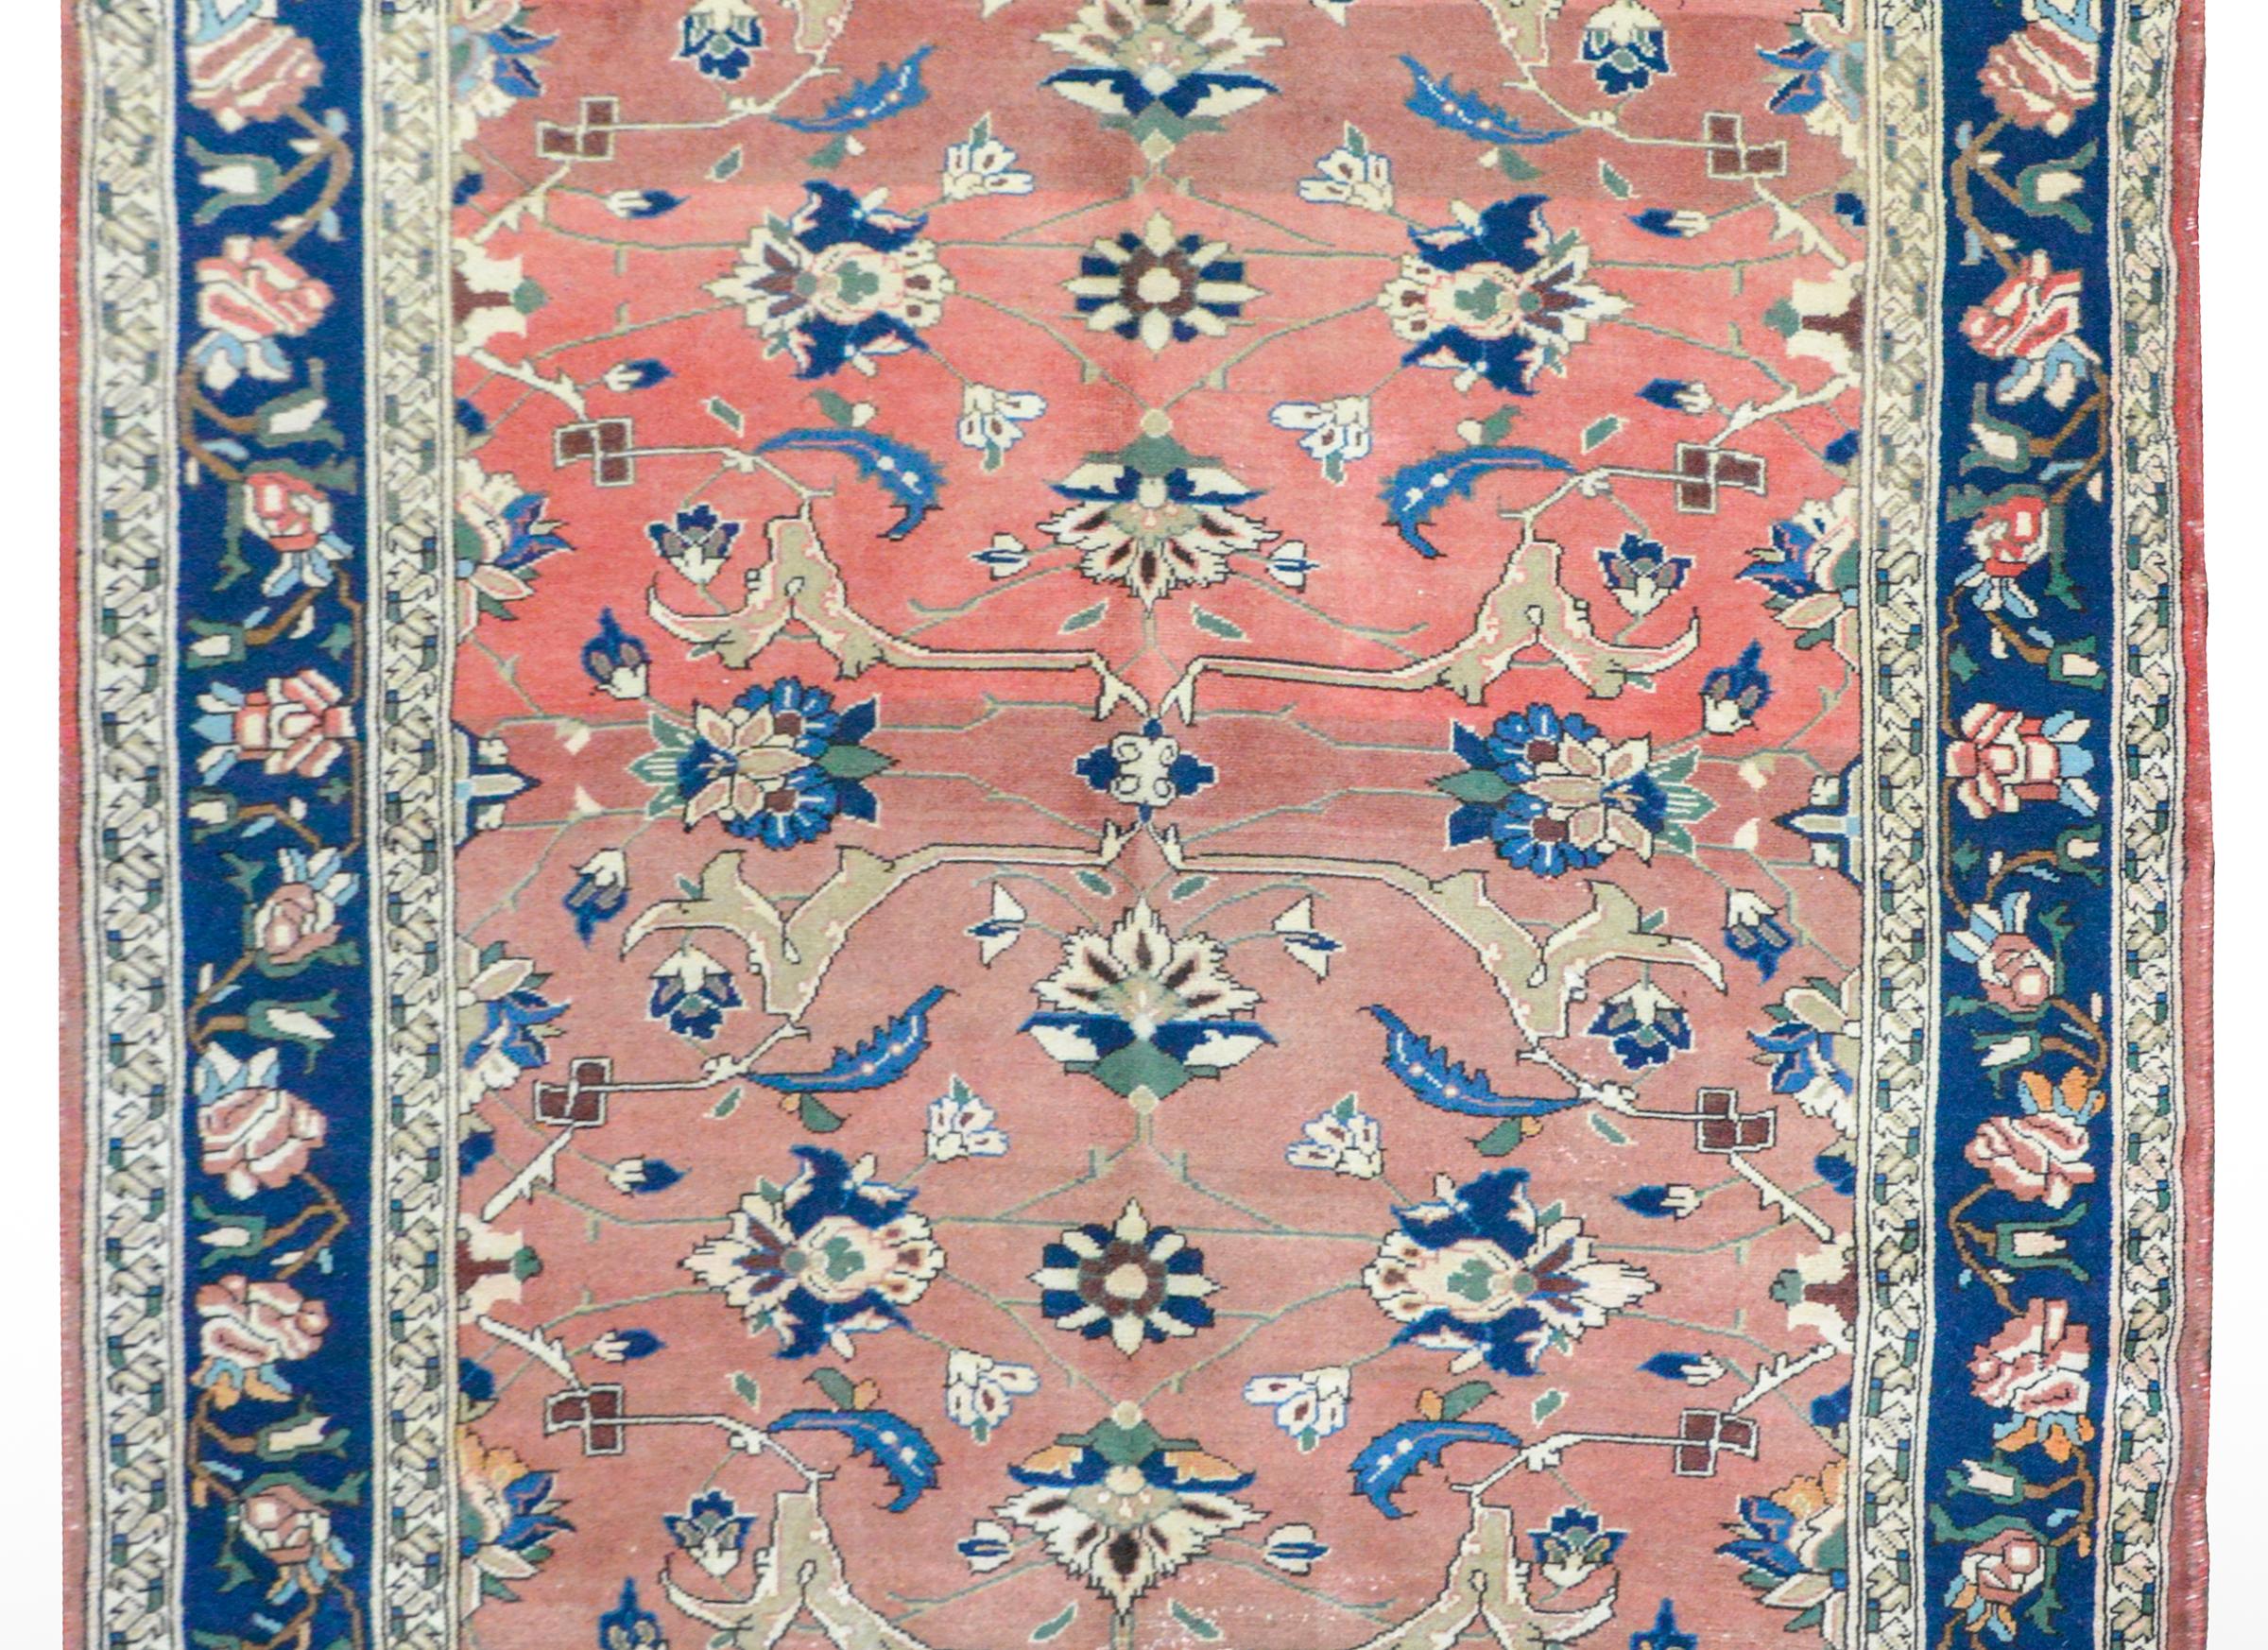 An outstanding early 20th century Persian Lilihan rug with a finely rendered floral pattern woven in light and dark indigo, cream, white, and green wool, again a beautiful abrash coral background. The border is wide with a scrolling vine and floral